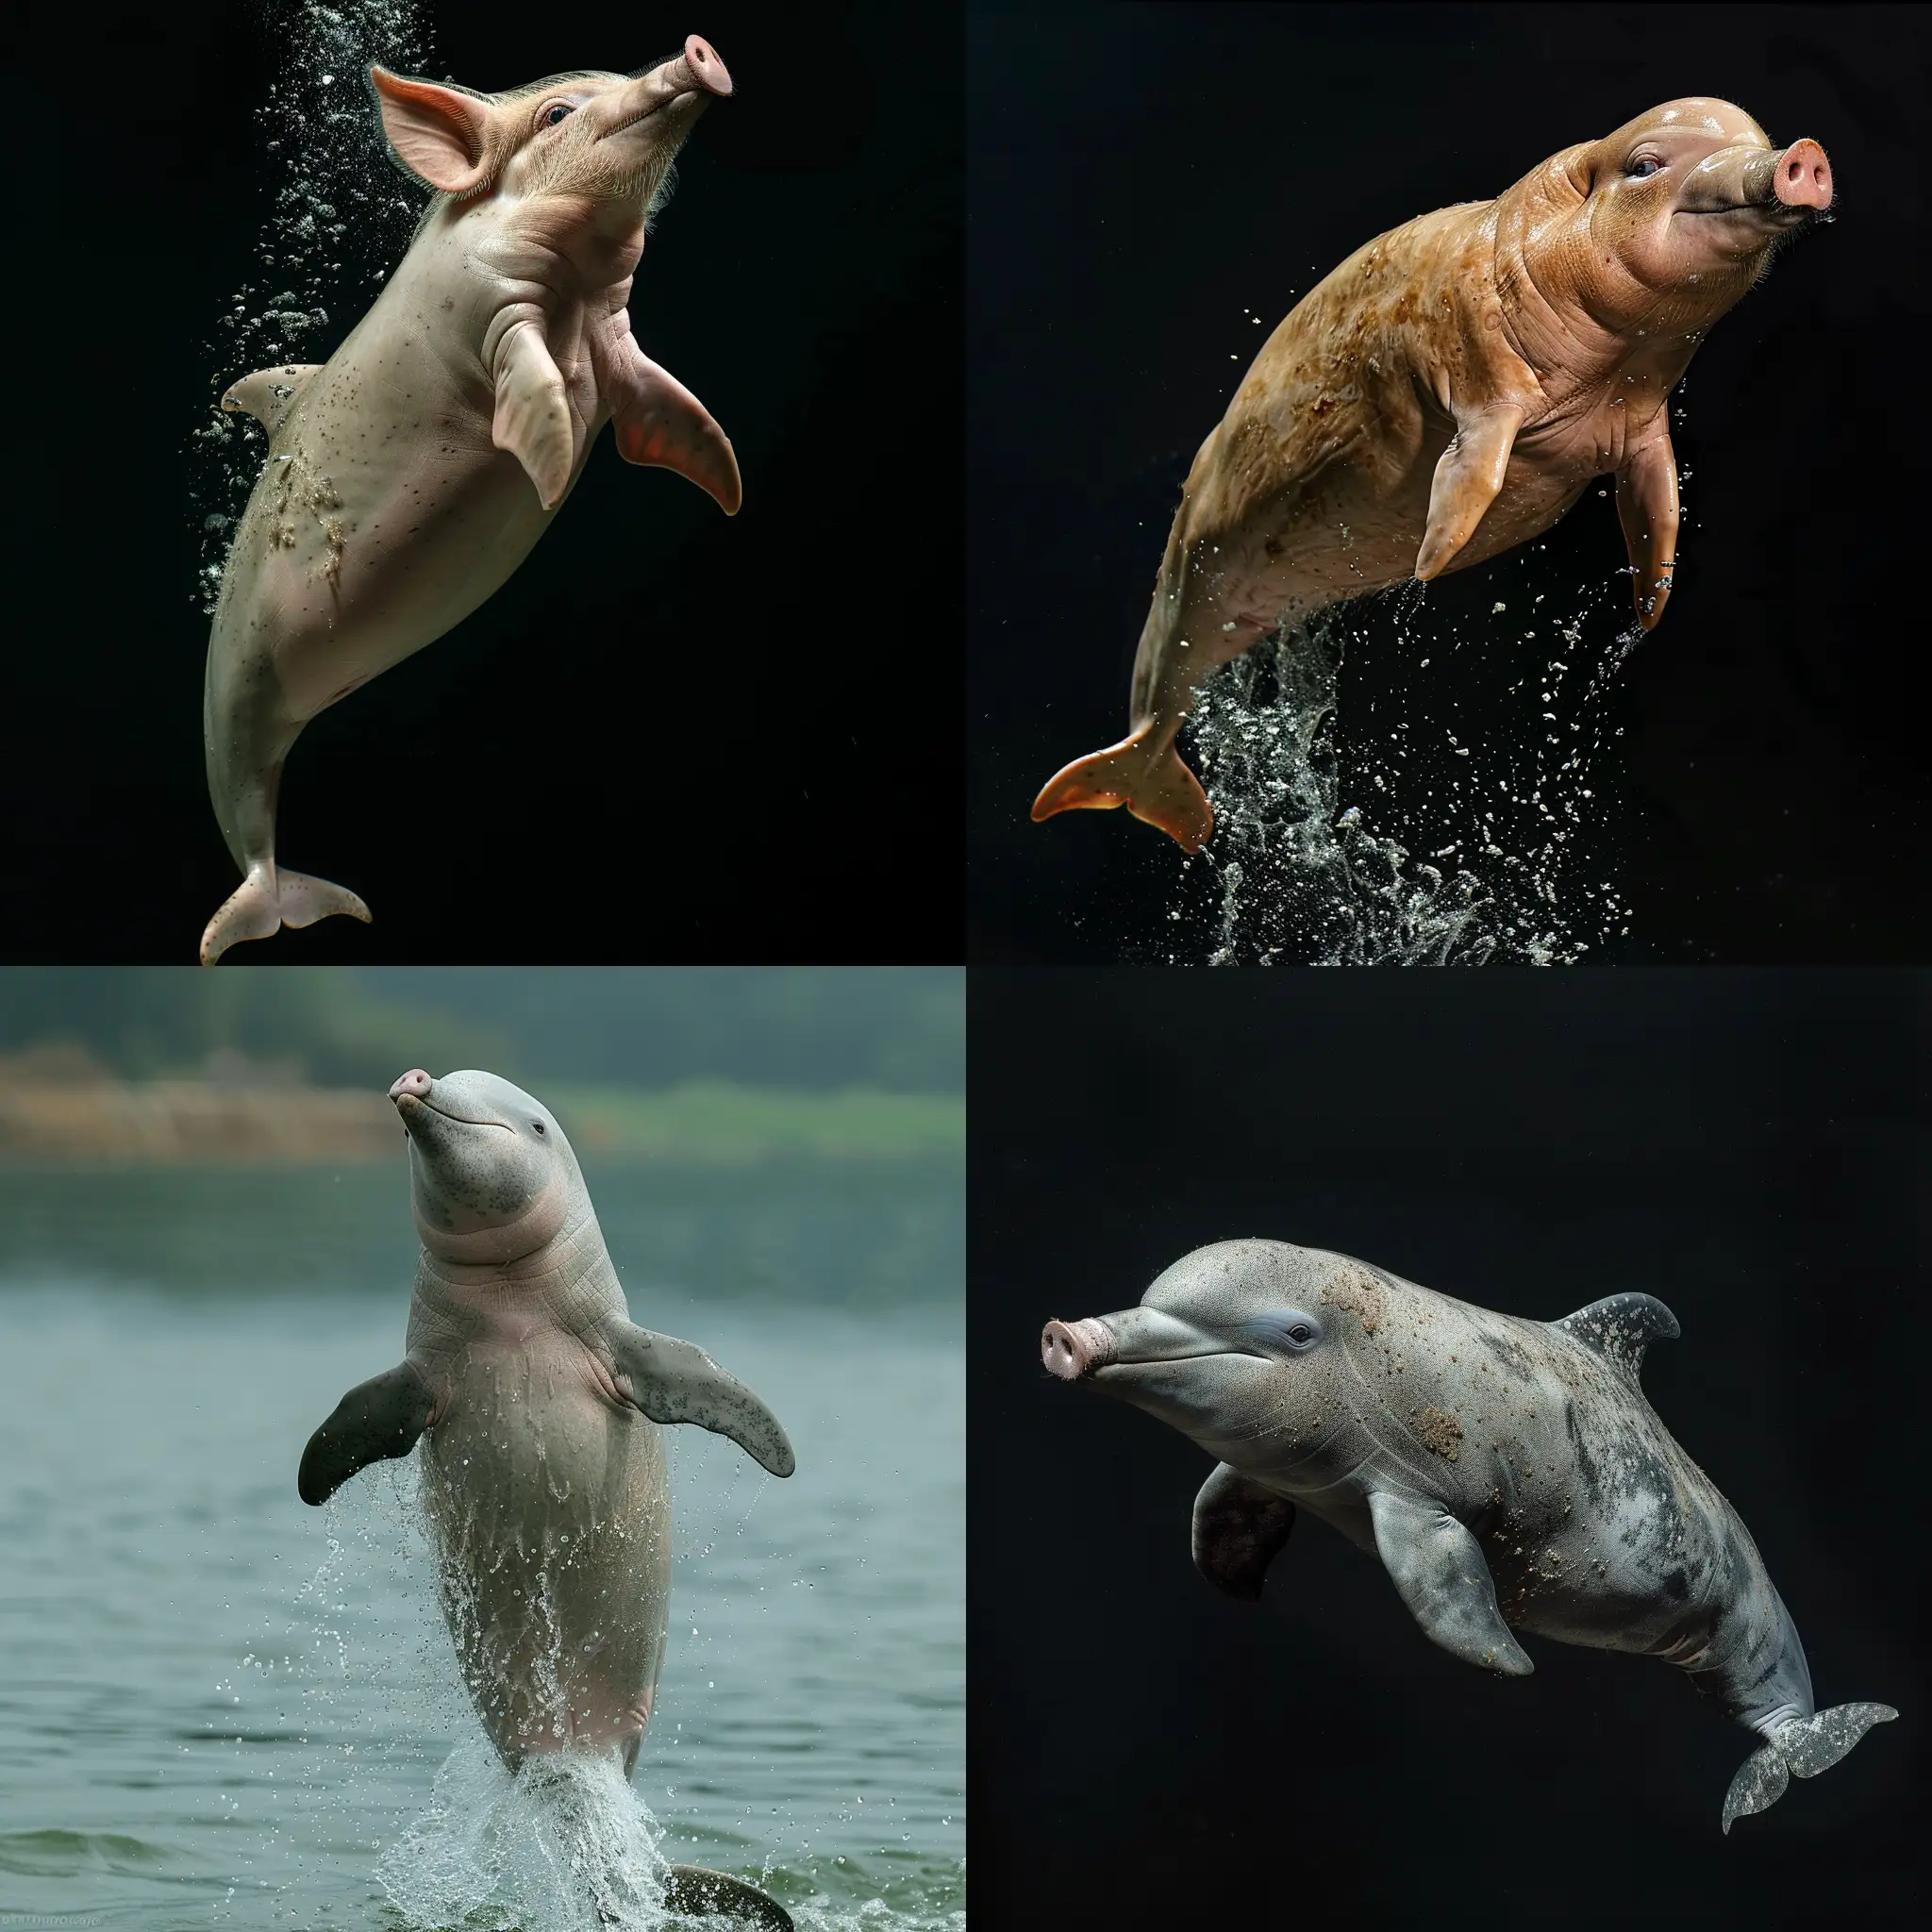 Cerdolin-Majestic-Hybrid-of-Pig-and-Dolphin-Captured-in-National-Geographic-Style